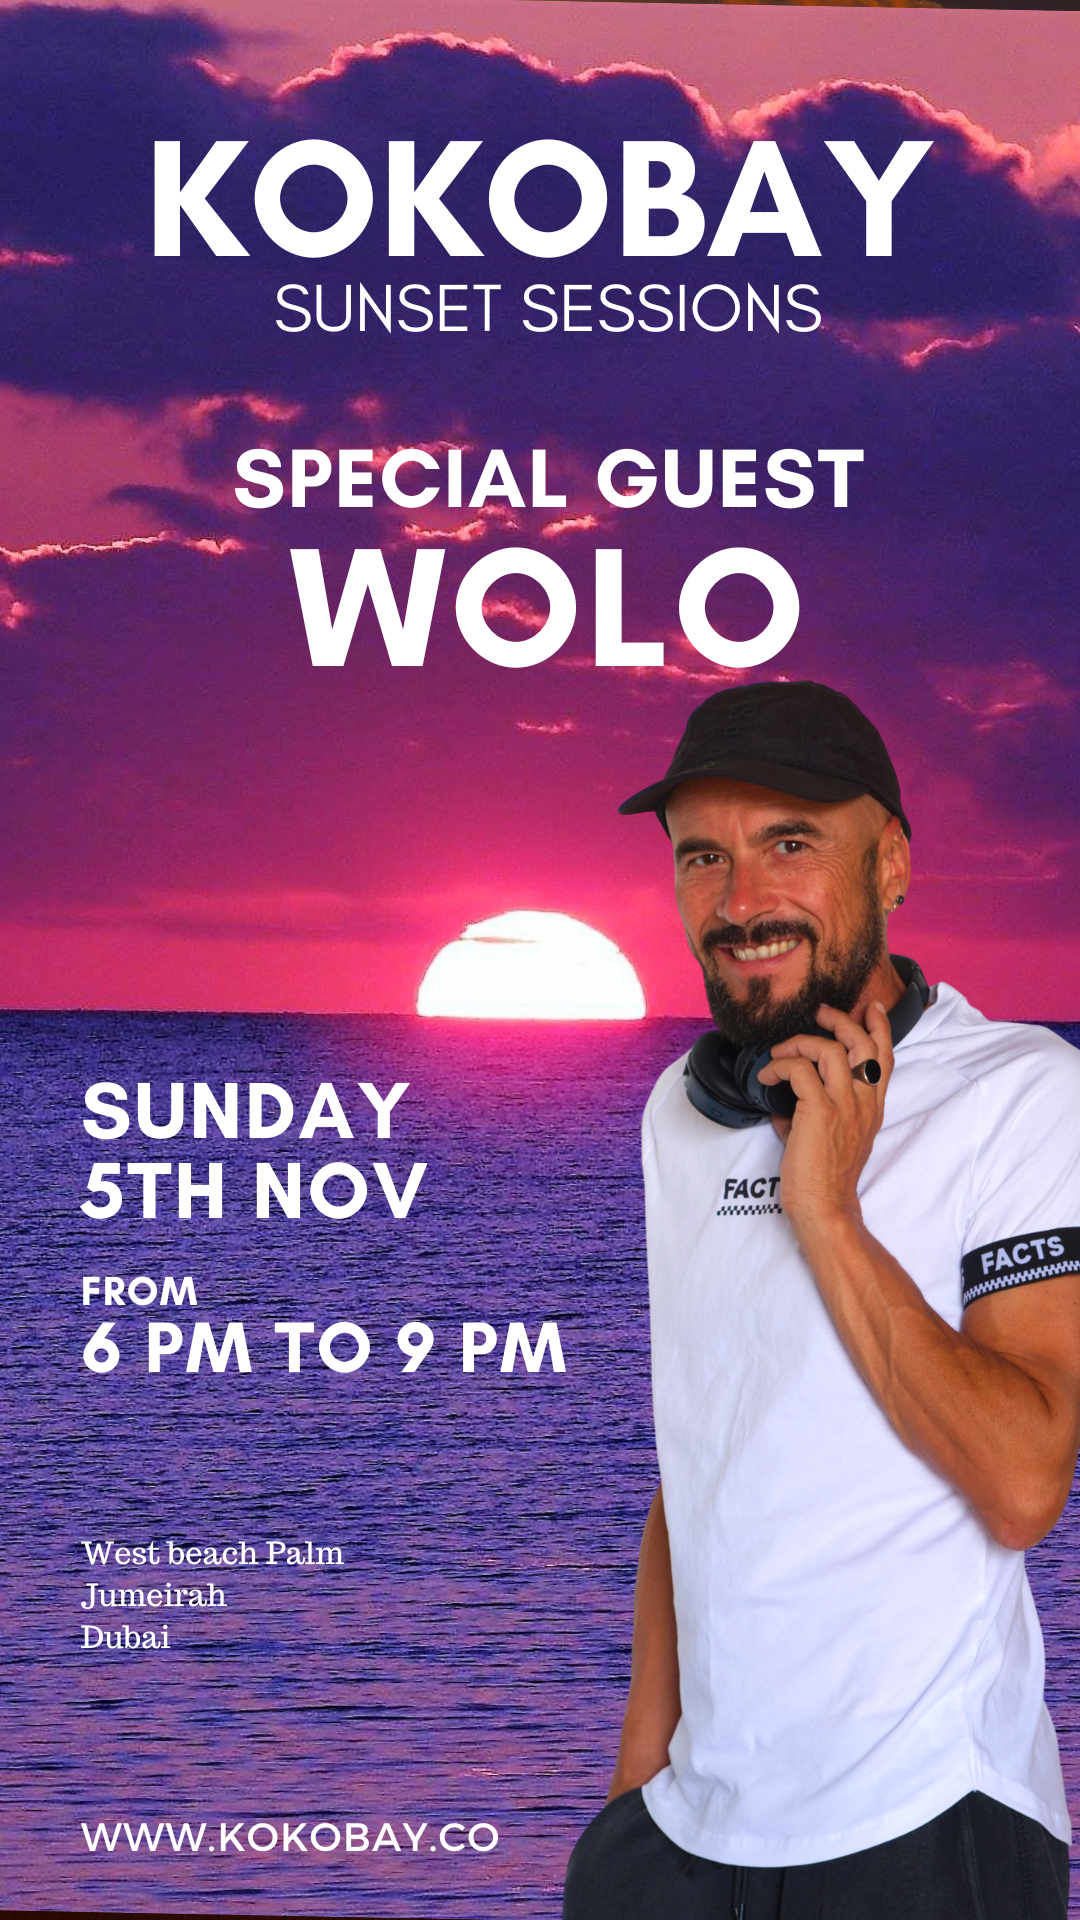 WOLO LIVE INSTRUMENTS & DJSET AT THE SUNSET - Página frontal